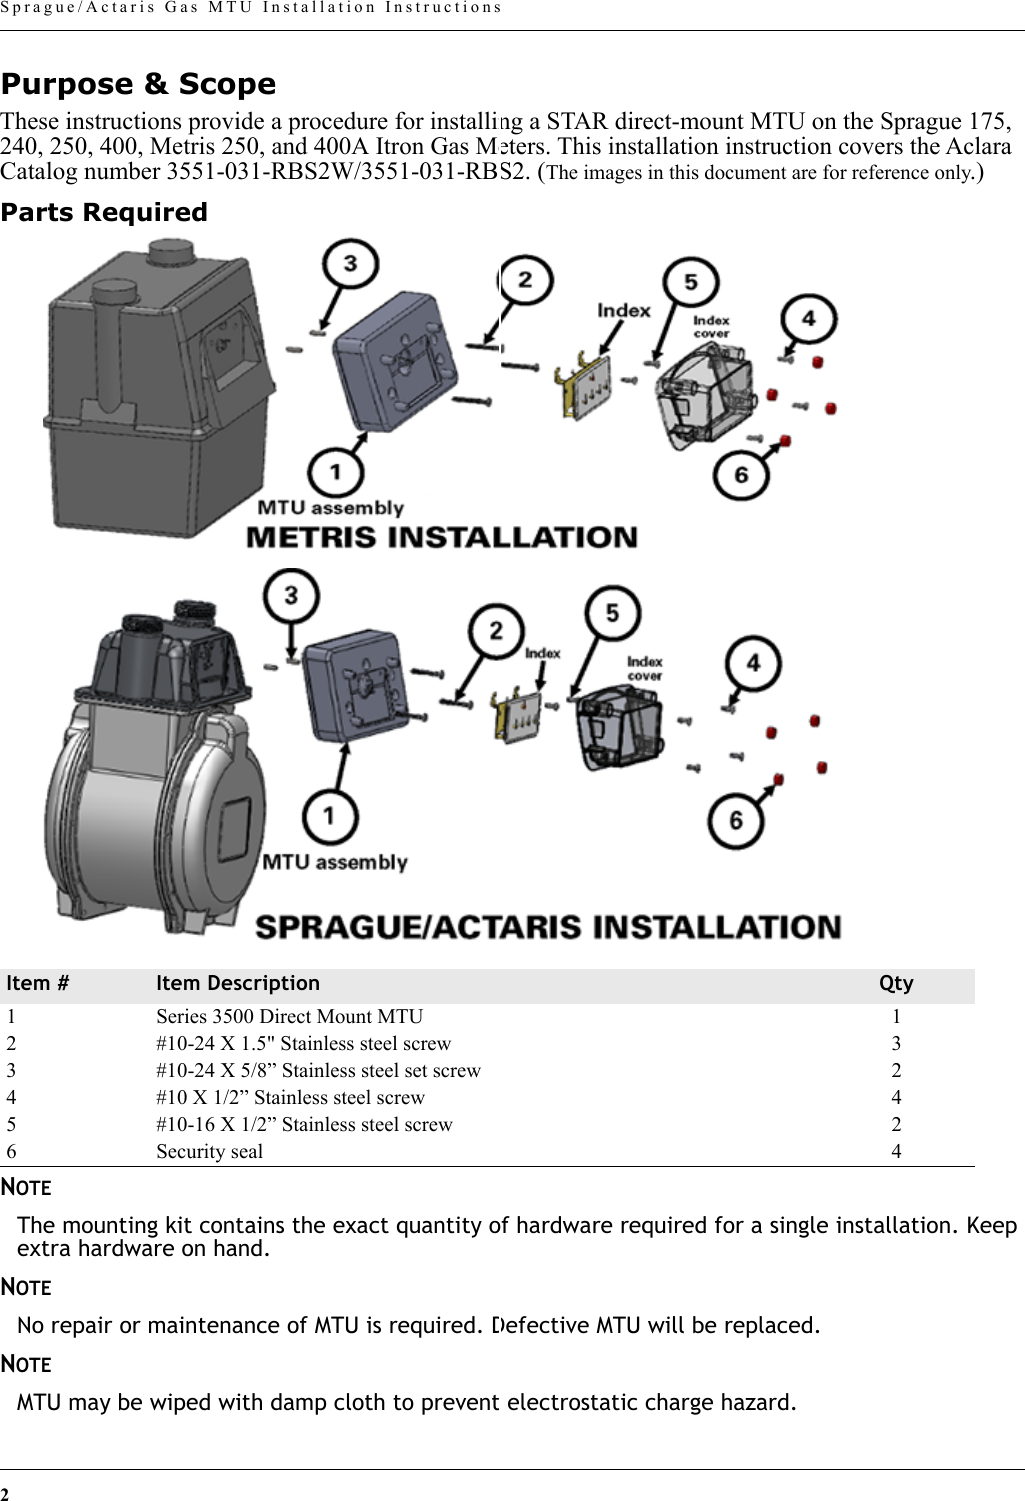 2 Sprague/Actaris Gas MTU Installation InstructionsPurpose &amp; ScopeThese instructions provide a procedure for installing a STAR direct-mount MTU on the Sprague 175, 240, 250, 400, Metris 250, and 400A Itron Gas Meters. This installation instruction covers the Aclara Catalog number 3551-031-RBS2W/3551-031-RBS2. (The images in this document are for reference only.)Parts RequiredNOTEThe mounting kit contains the exact quantity of hardware required for a single installation. Keep extra hardware on hand.NOTENo repair or maintenance of MTU is required. Defective MTU will be replaced.NOTEMTU may be wiped with damp cloth to prevent electrostatic charge hazard.Item # Item Description Qty1 Series 3500 Direct Mount MTU 12 #10-24 X 1.5&quot; Stainless steel screw 33 #10-24 X 5/8” Stainless steel set screw 24 #10 X 1/2” Stainless steel screw 45 #10-16 X 1/2” Stainless steel screw 26 Security seal 4